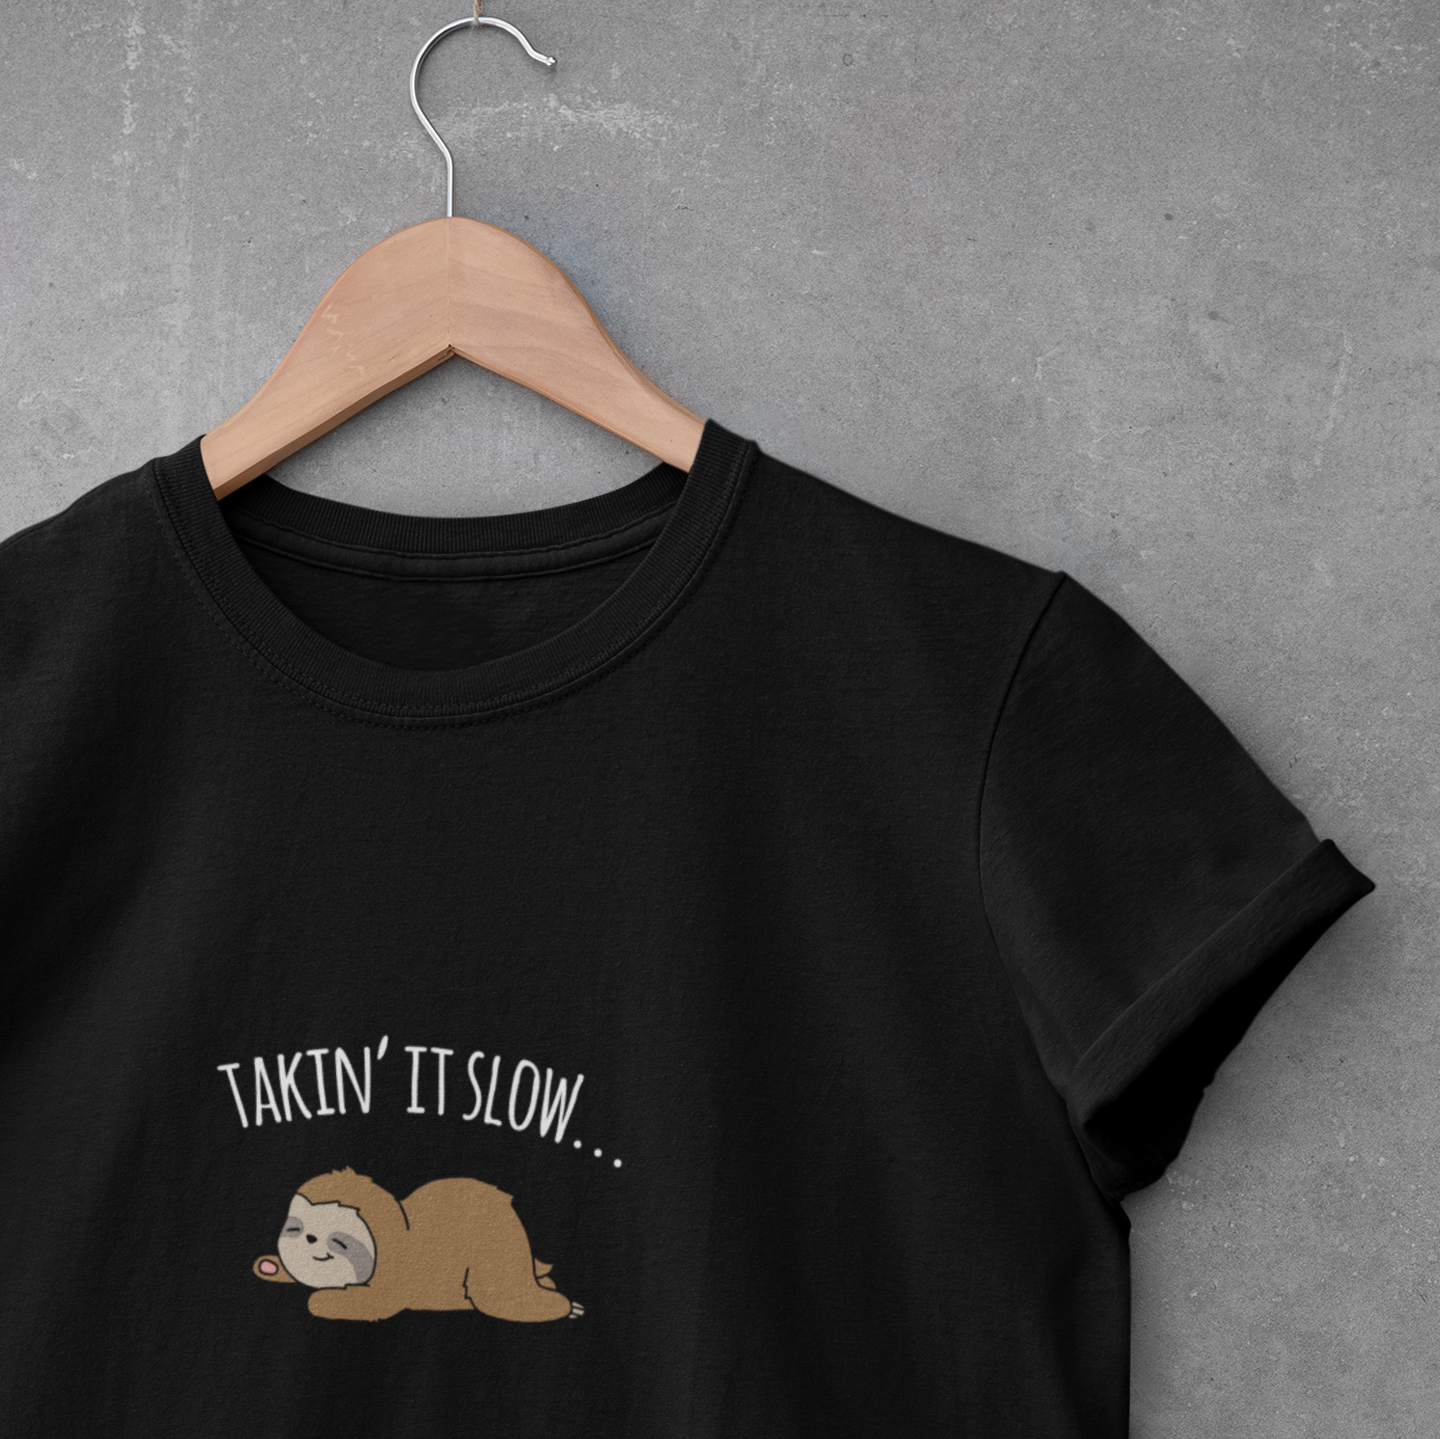 brown sleeping lazy sloth pun advice to take it slow in white text on black hanging t-shirt.